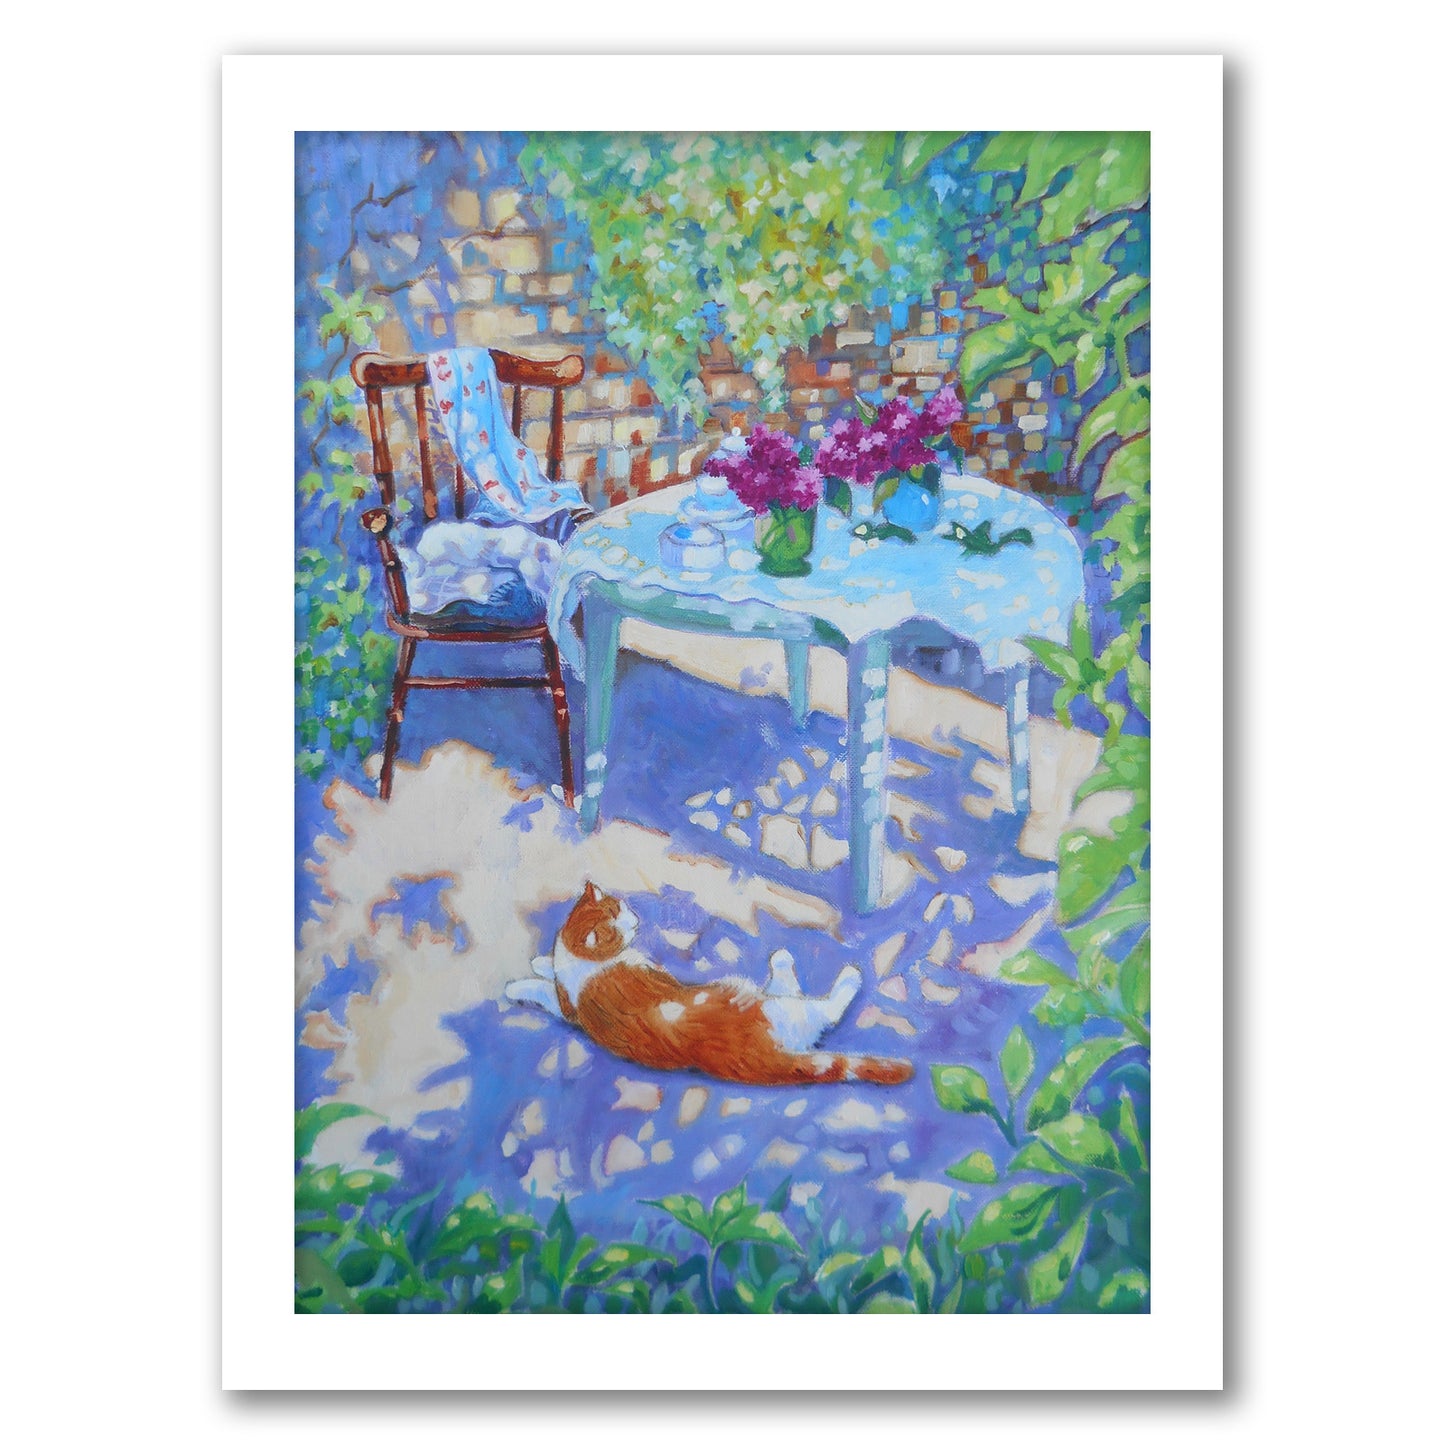 Ginger Cat In The Shadows By Mary Kemp - Framed Print